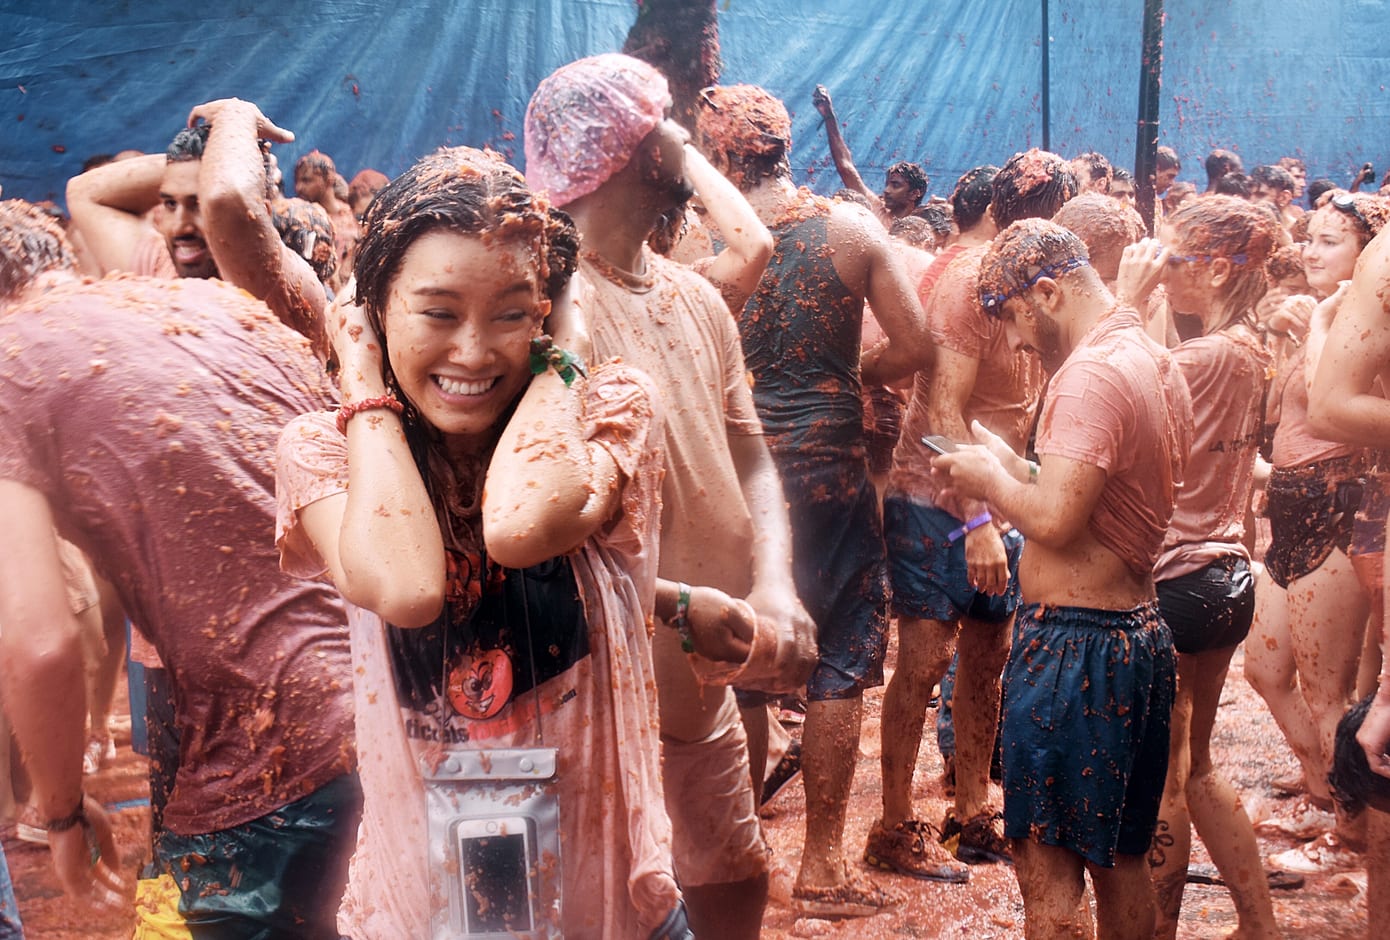 A woman covered in tomato juice during La Tomatina Festival, Bunol, Spain